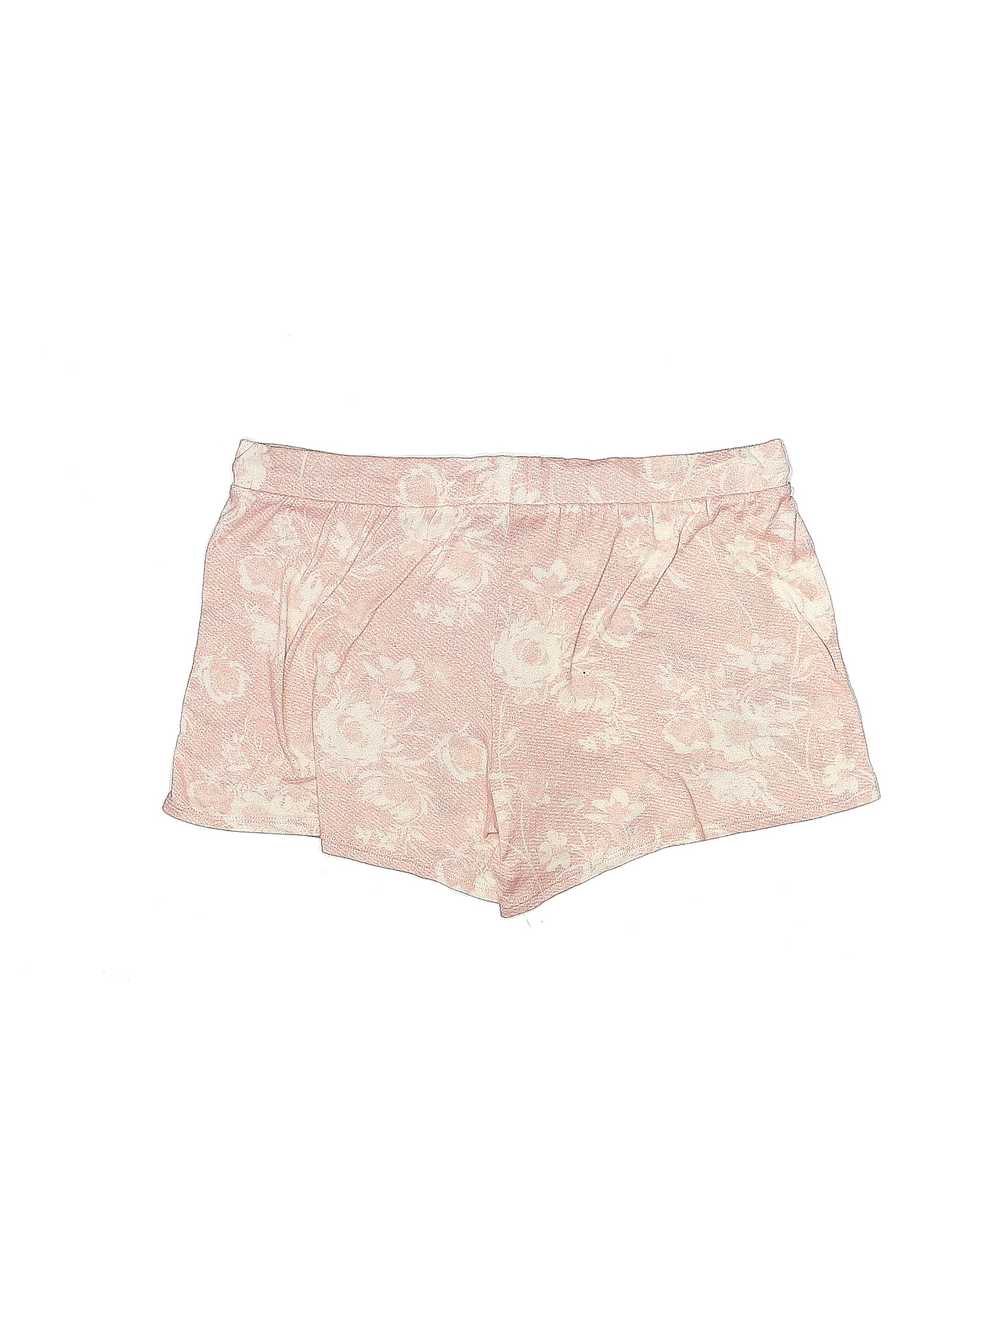 Lucky Brand Women Pink Shorts L - image 2